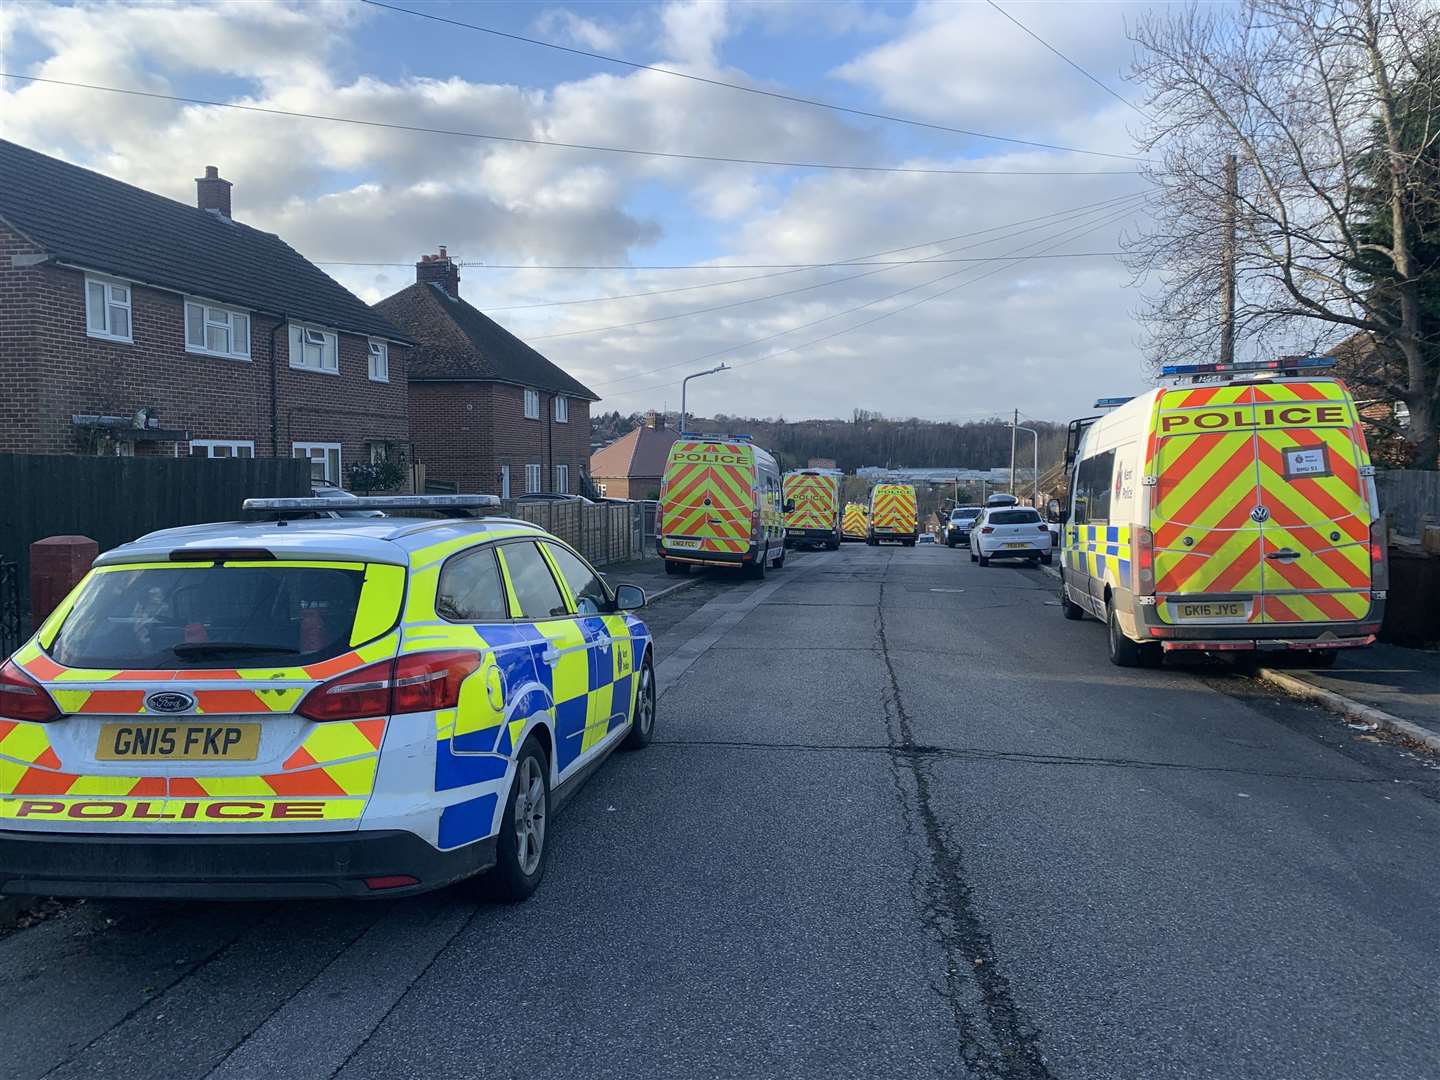 A large police presence remains in Caley Road, Tunbridge Wells, four days after a man was found dead. Picture: KMTV (53623508)